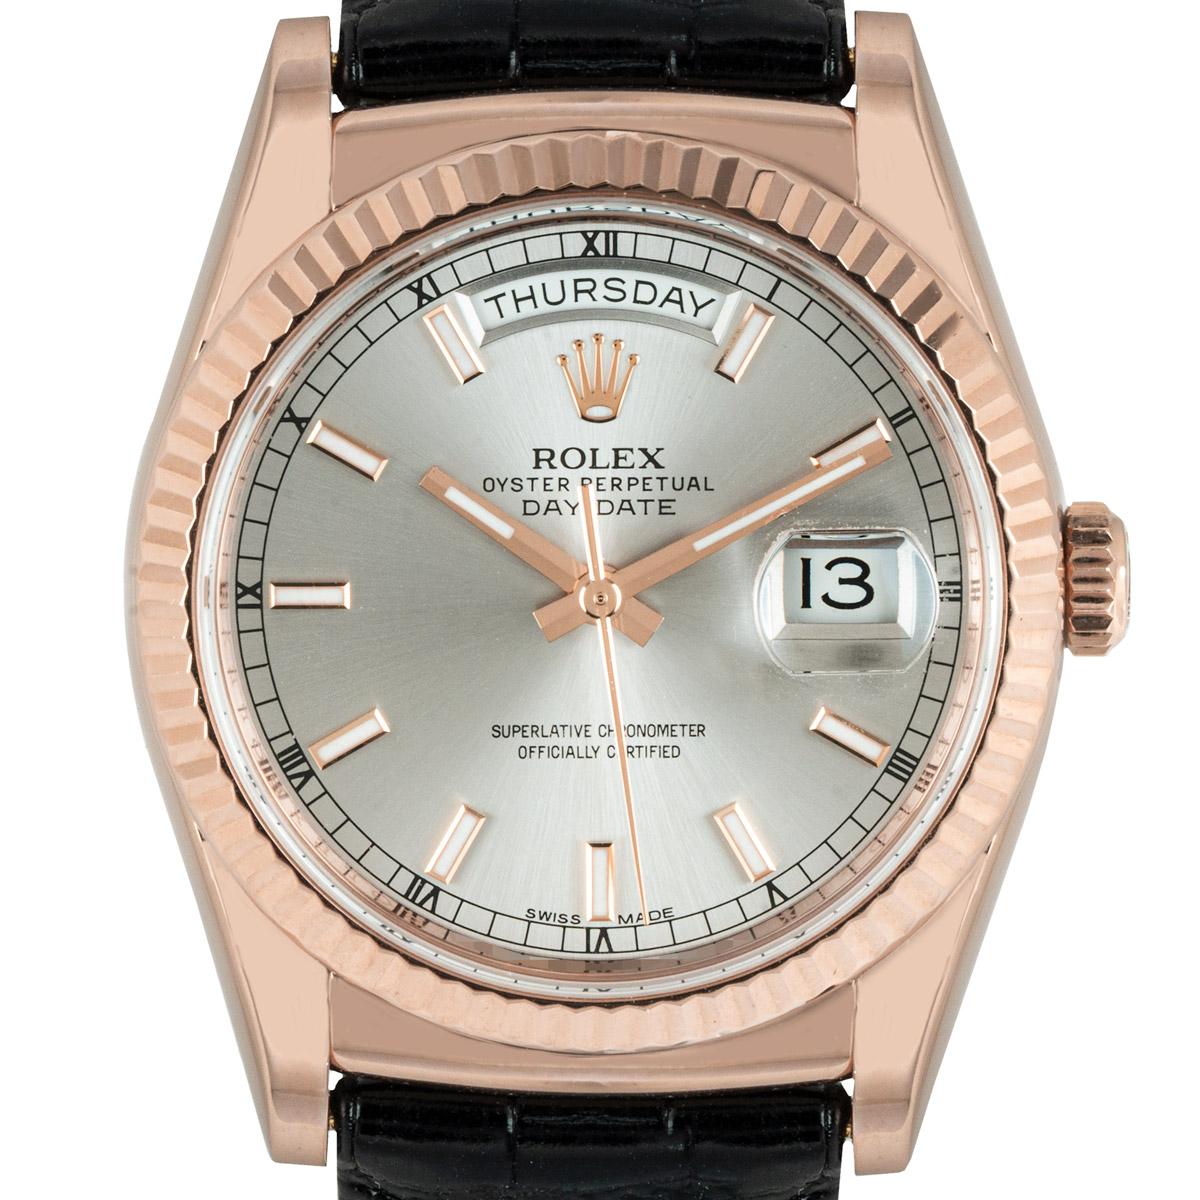 A 36mm Day-Date in rose gold by Rolex, featuring a rhodium dial and a fluted bezel. Presented on a generic black leather strap with an original rose gold deployant clasp. Fitted with a scratch-resistant sapphire crystal and a self-winding automatic